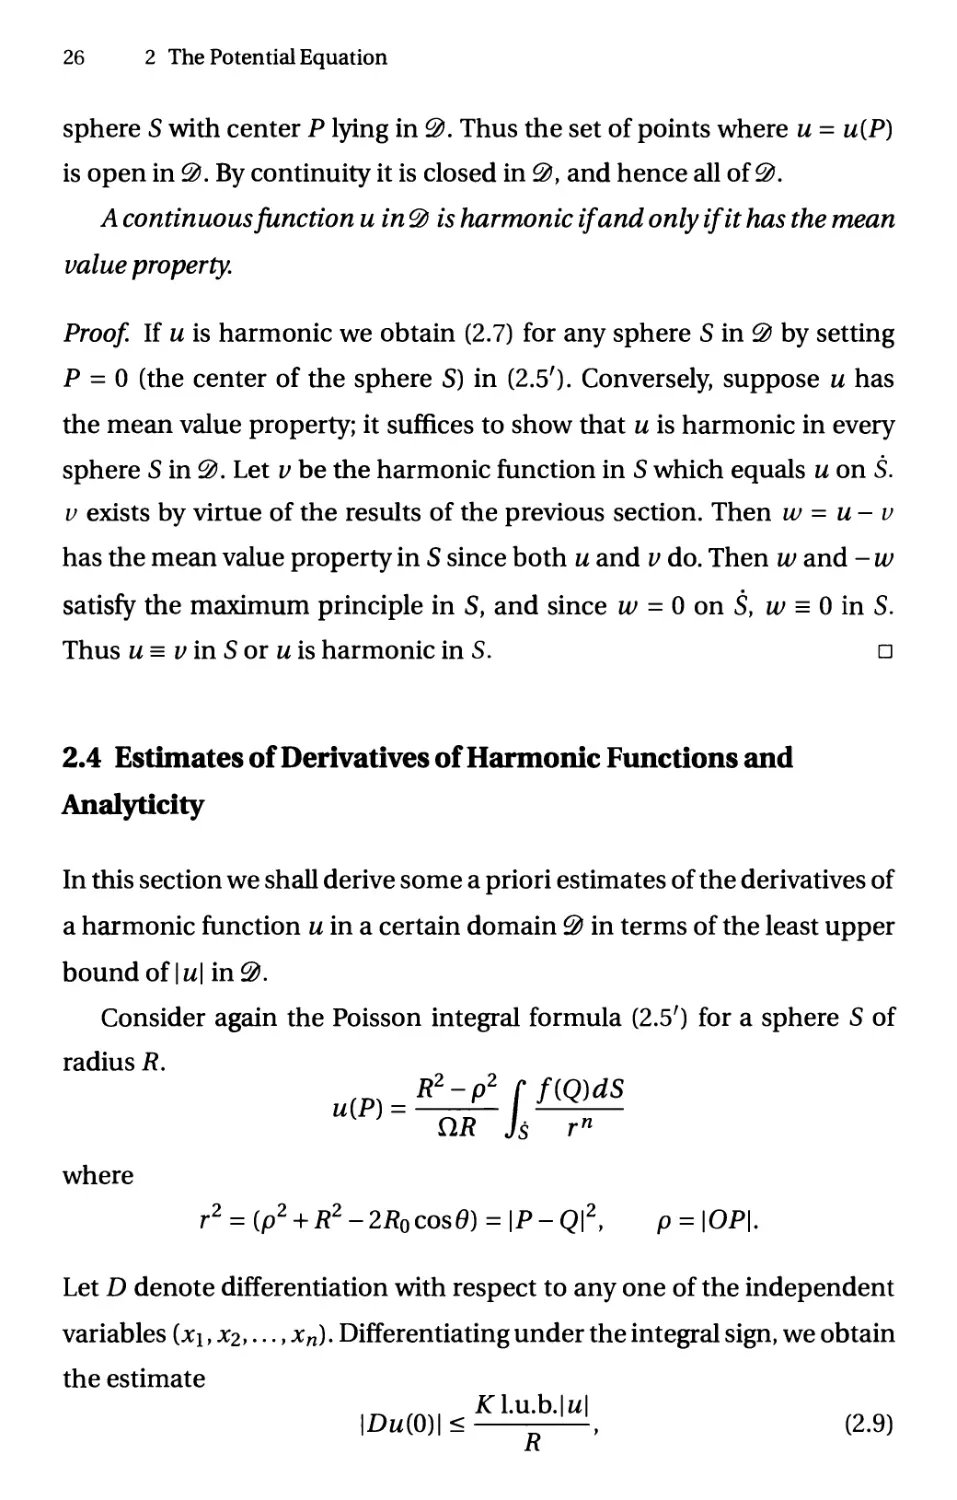 2.4 Estimates of Derivatives of Harmonic Functions and Analyticity